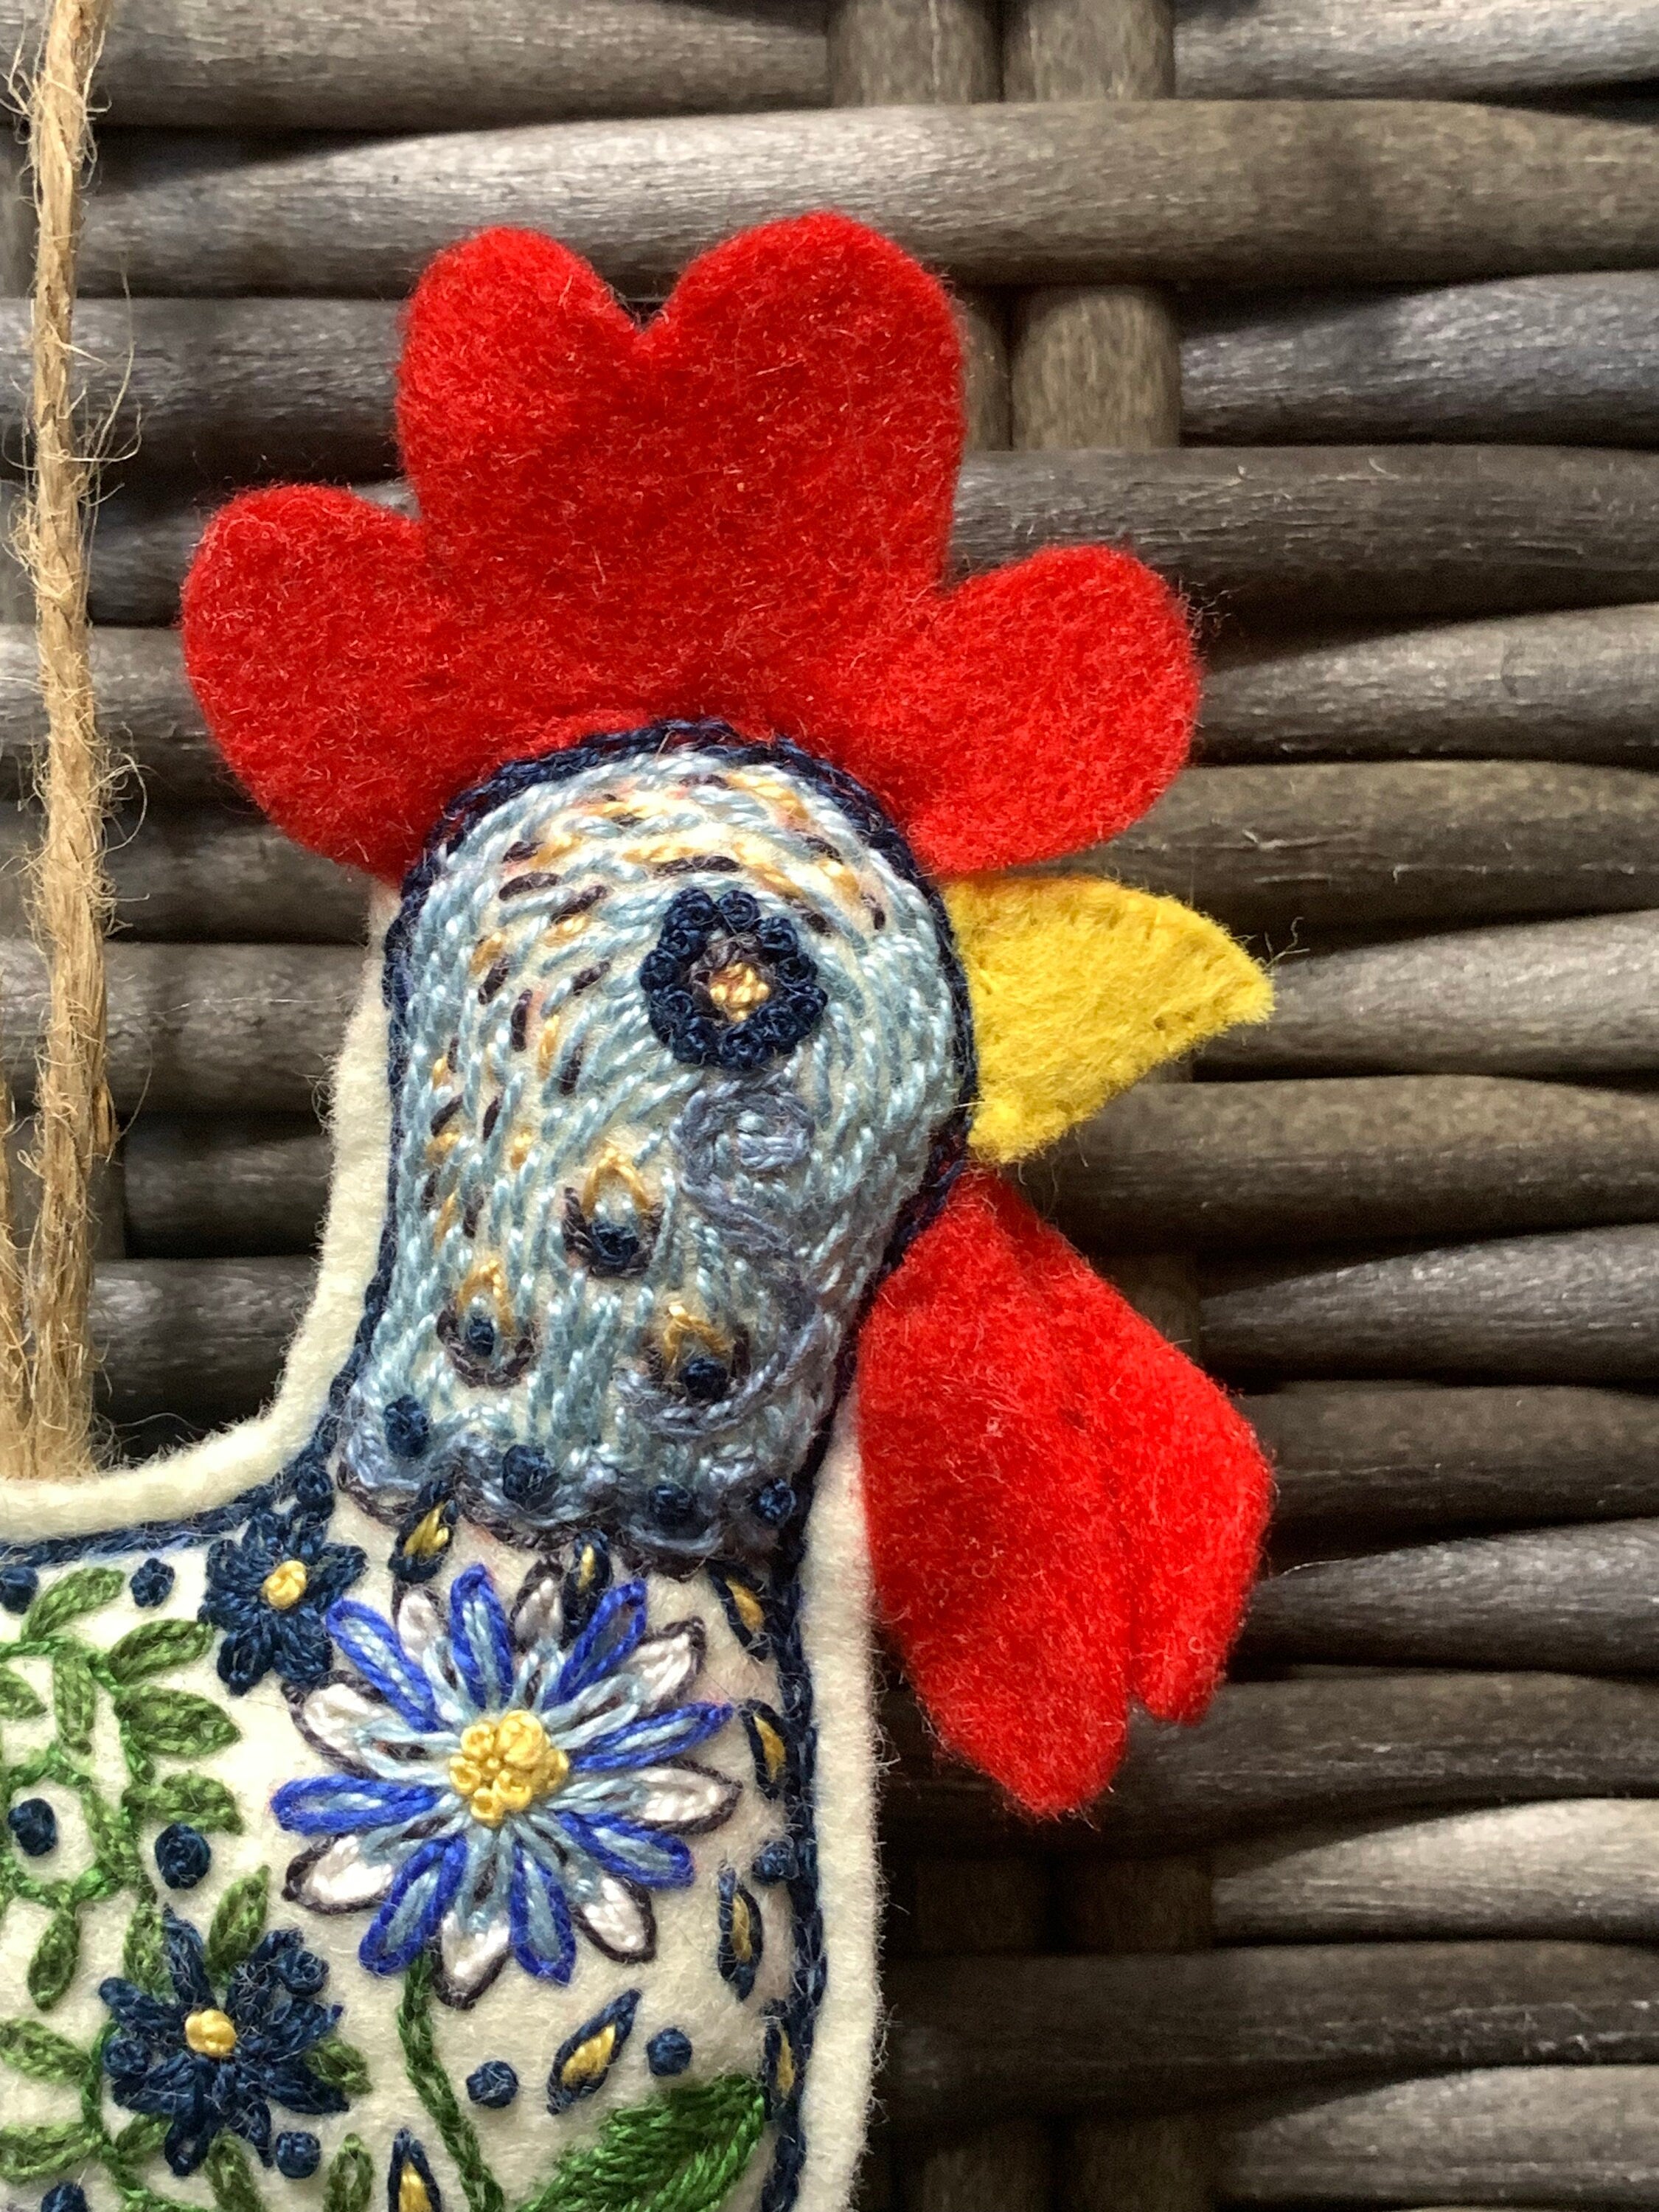 Hand Embroidered Folk Art Chicken Rooster Ornament